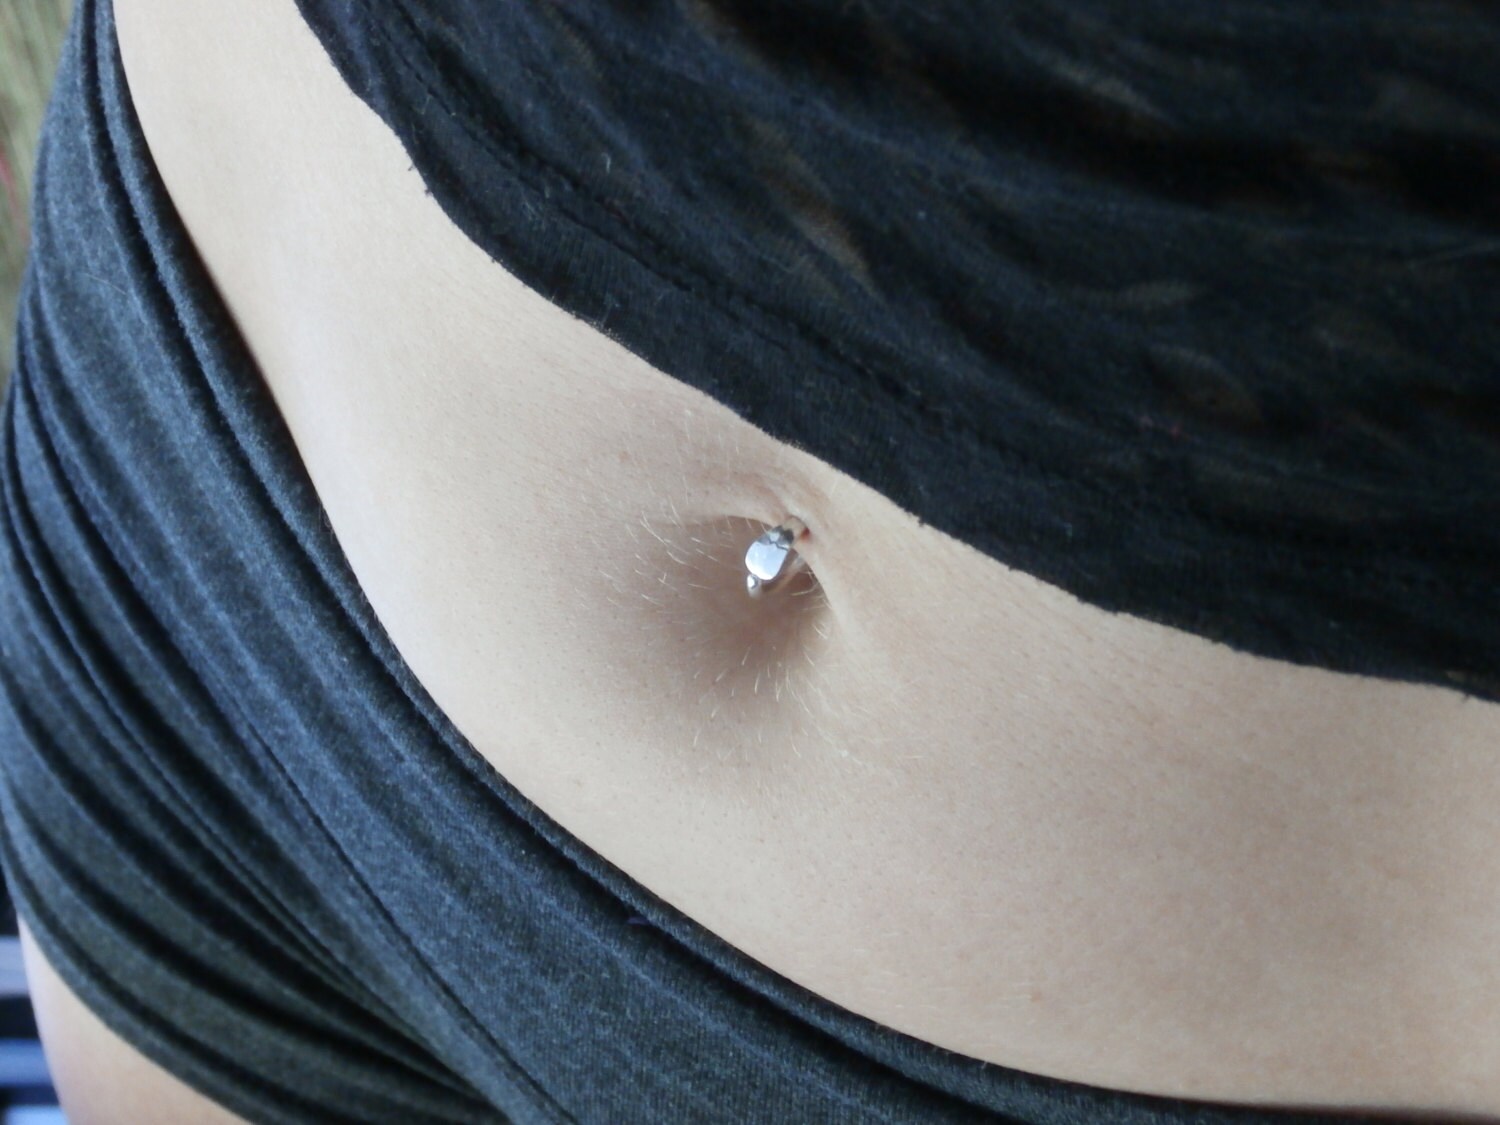 Pebble Belly Button Ring .999 Fine Silver 14k Solid 